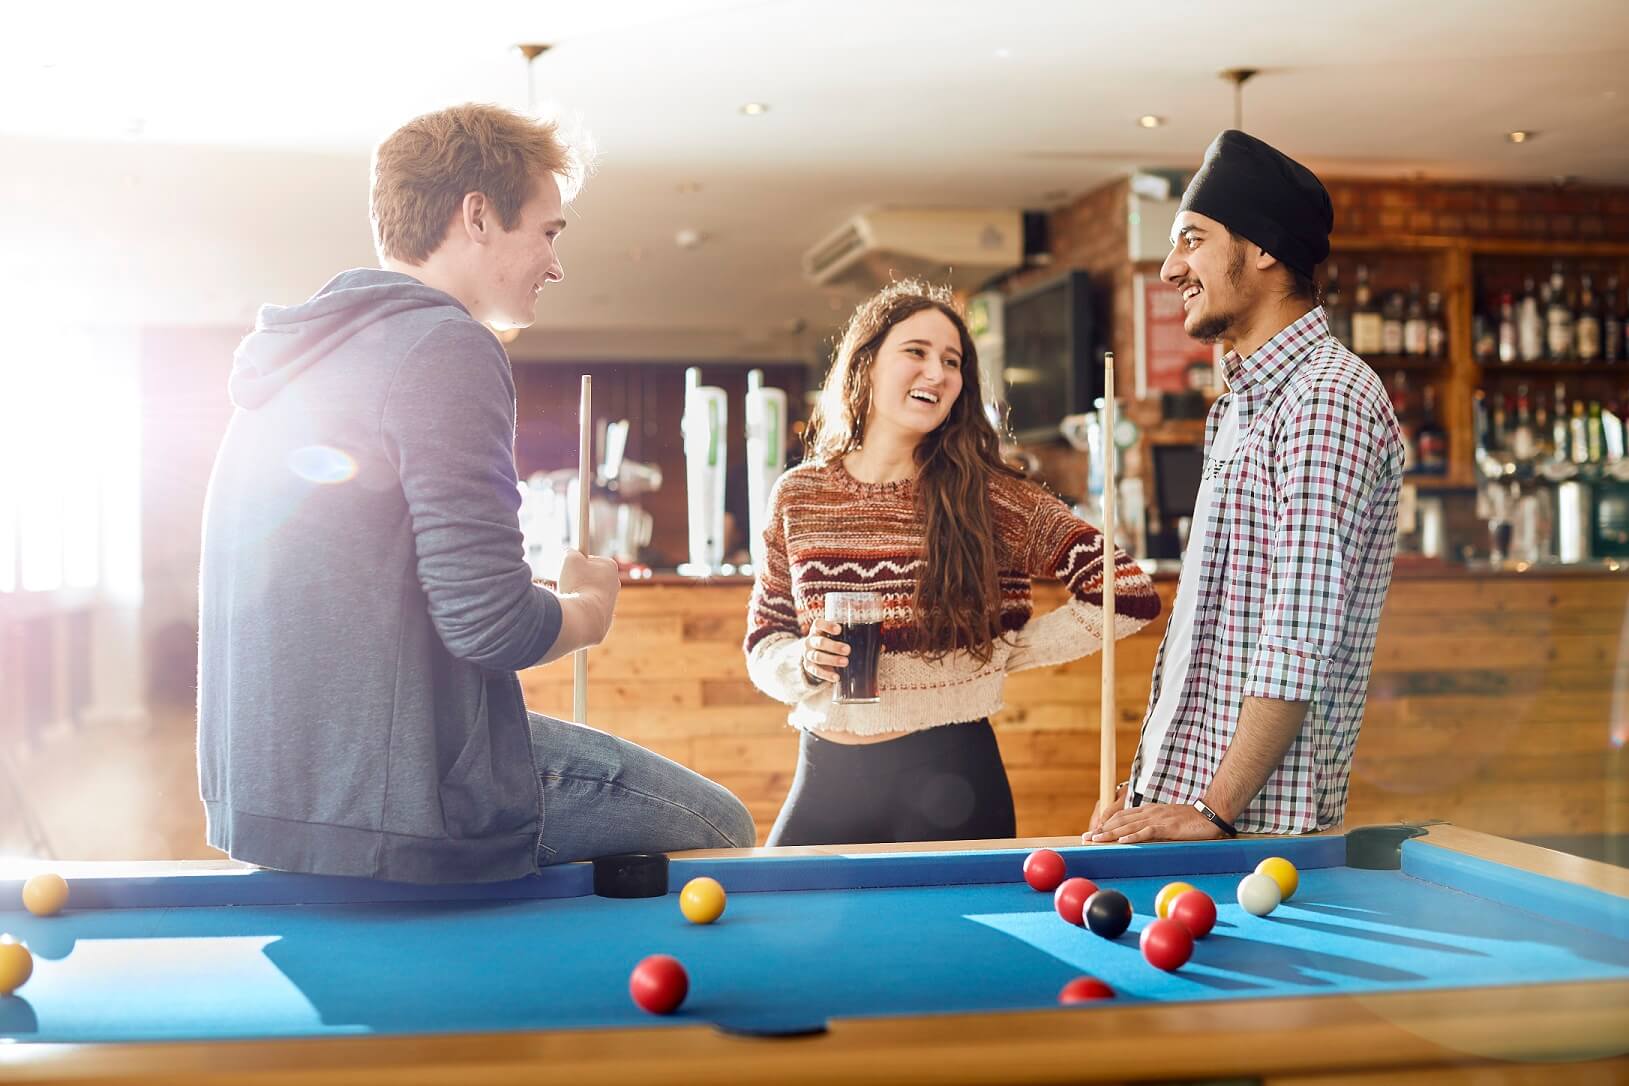 Students chatting around a pool table